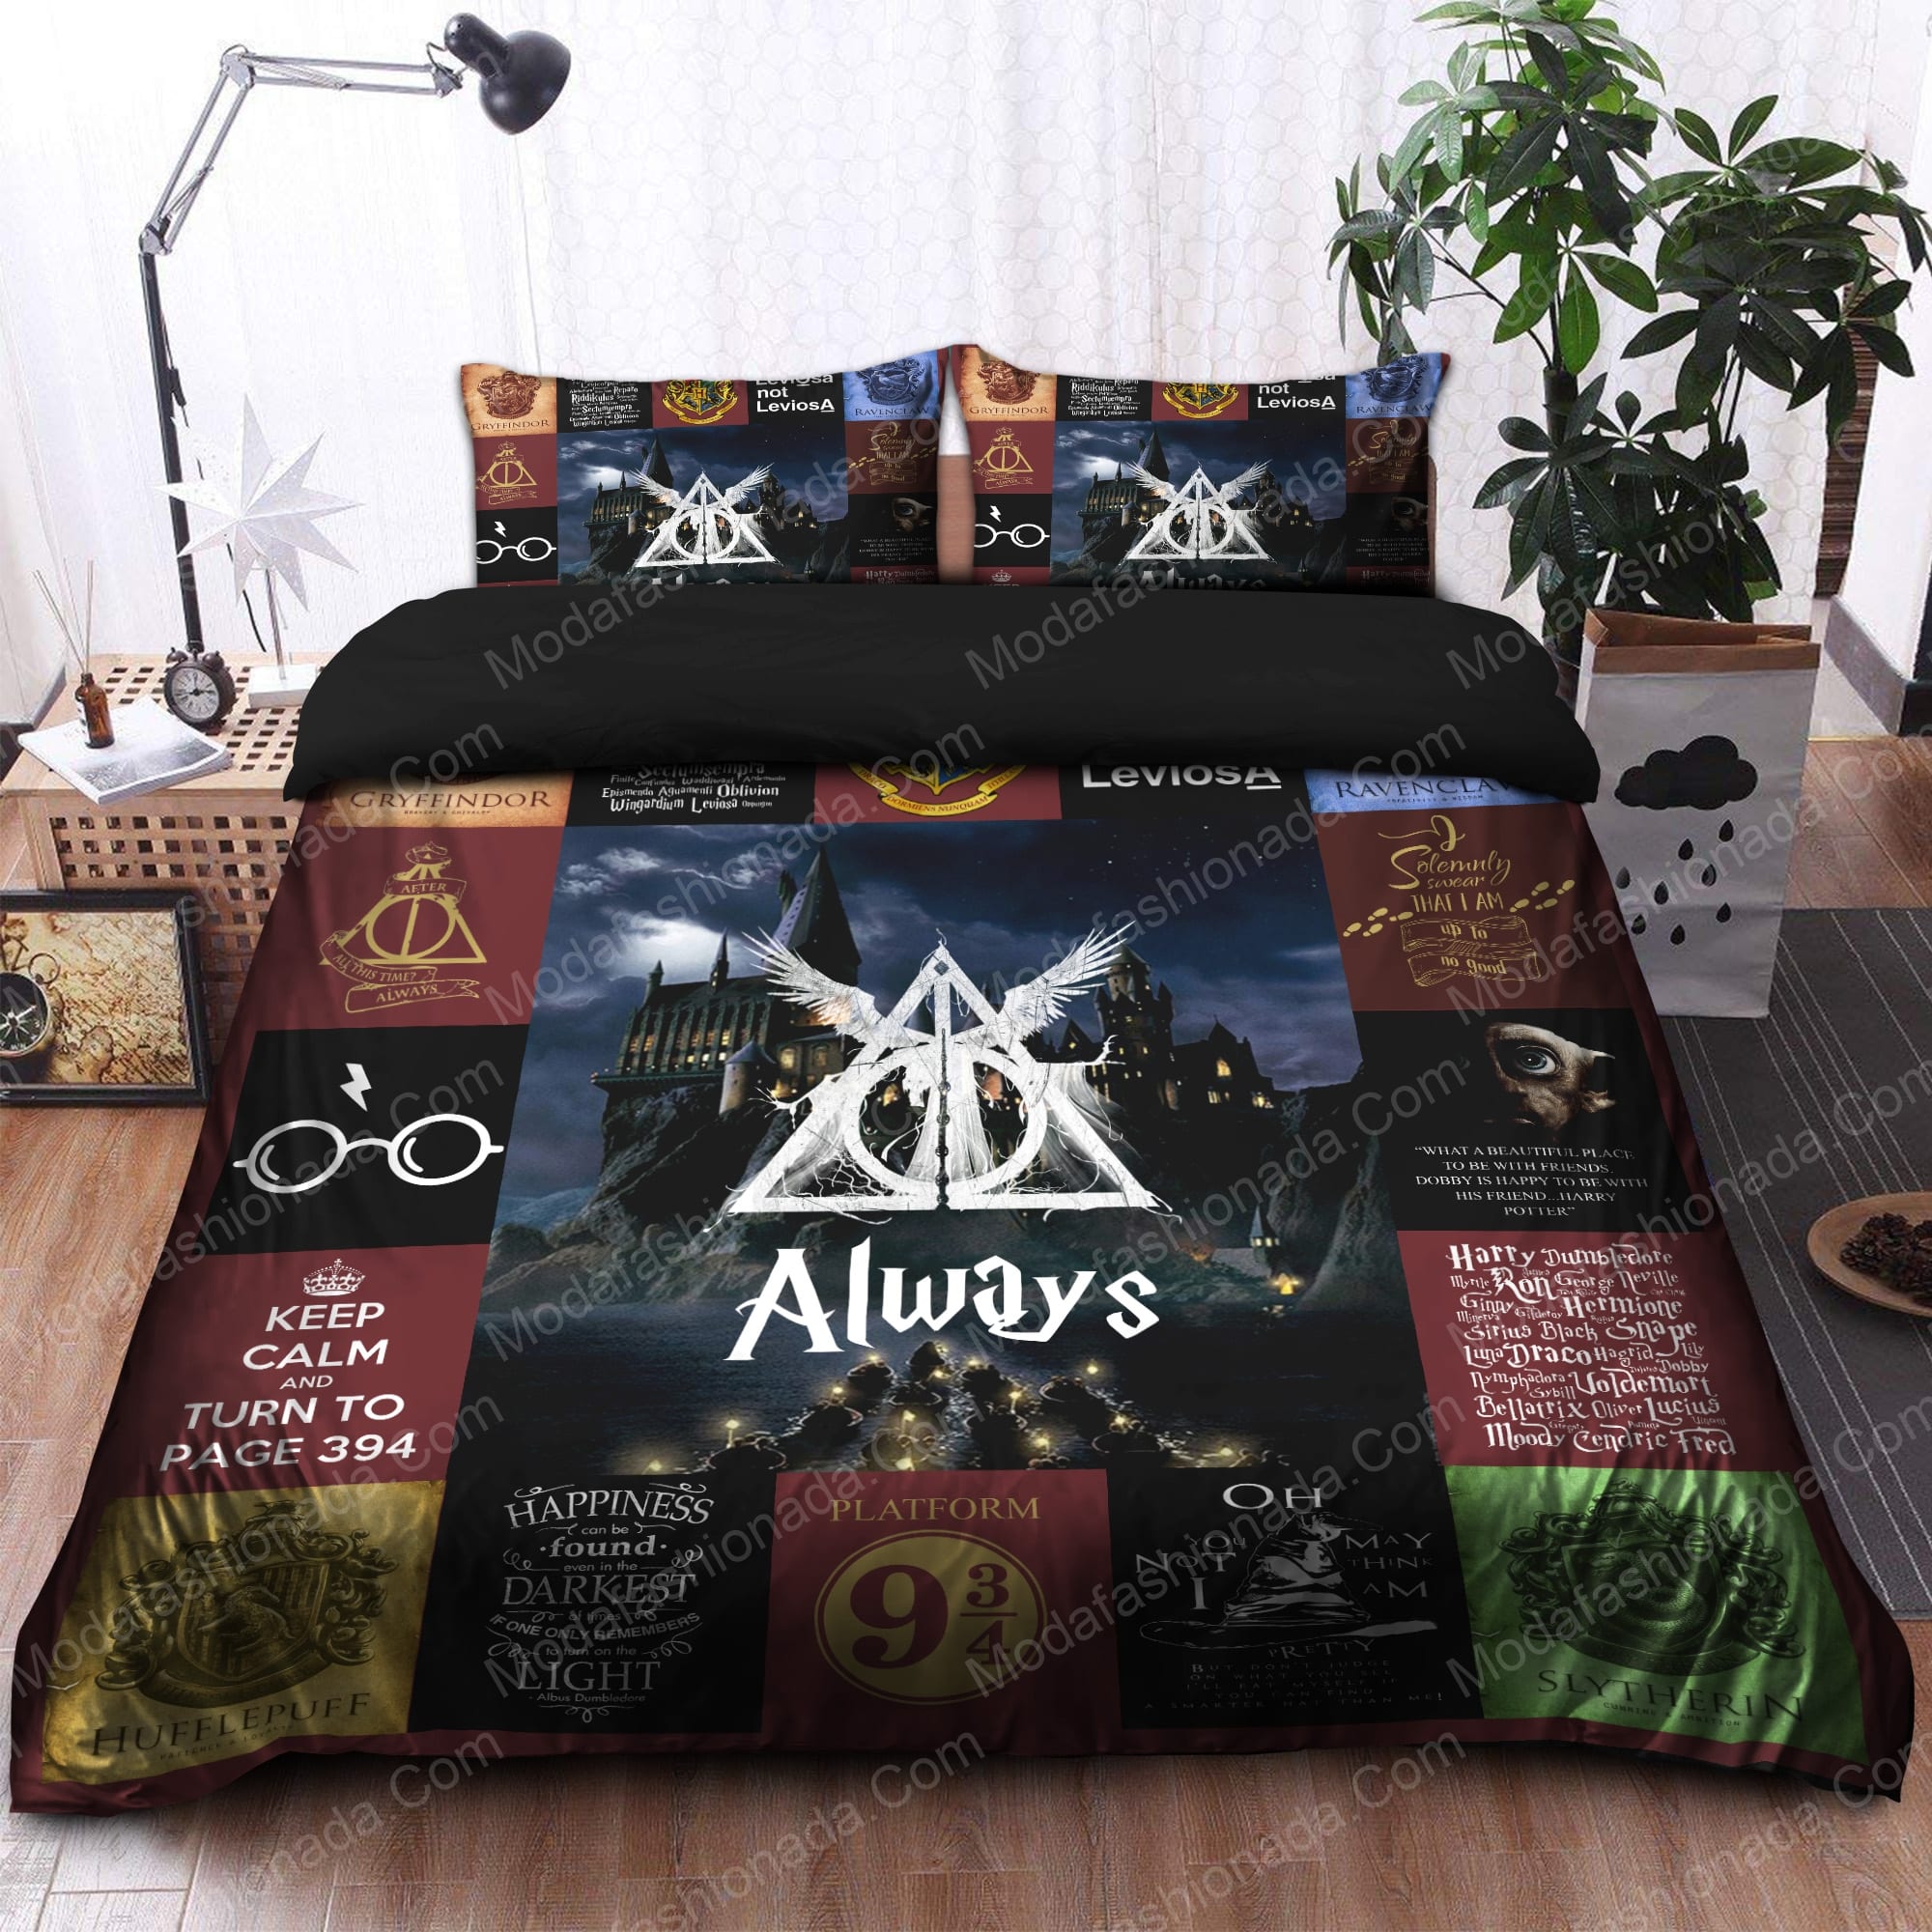 Buy Harry Potter Bedding Sets Bed Sets With Twin, Full, Queen, King Size